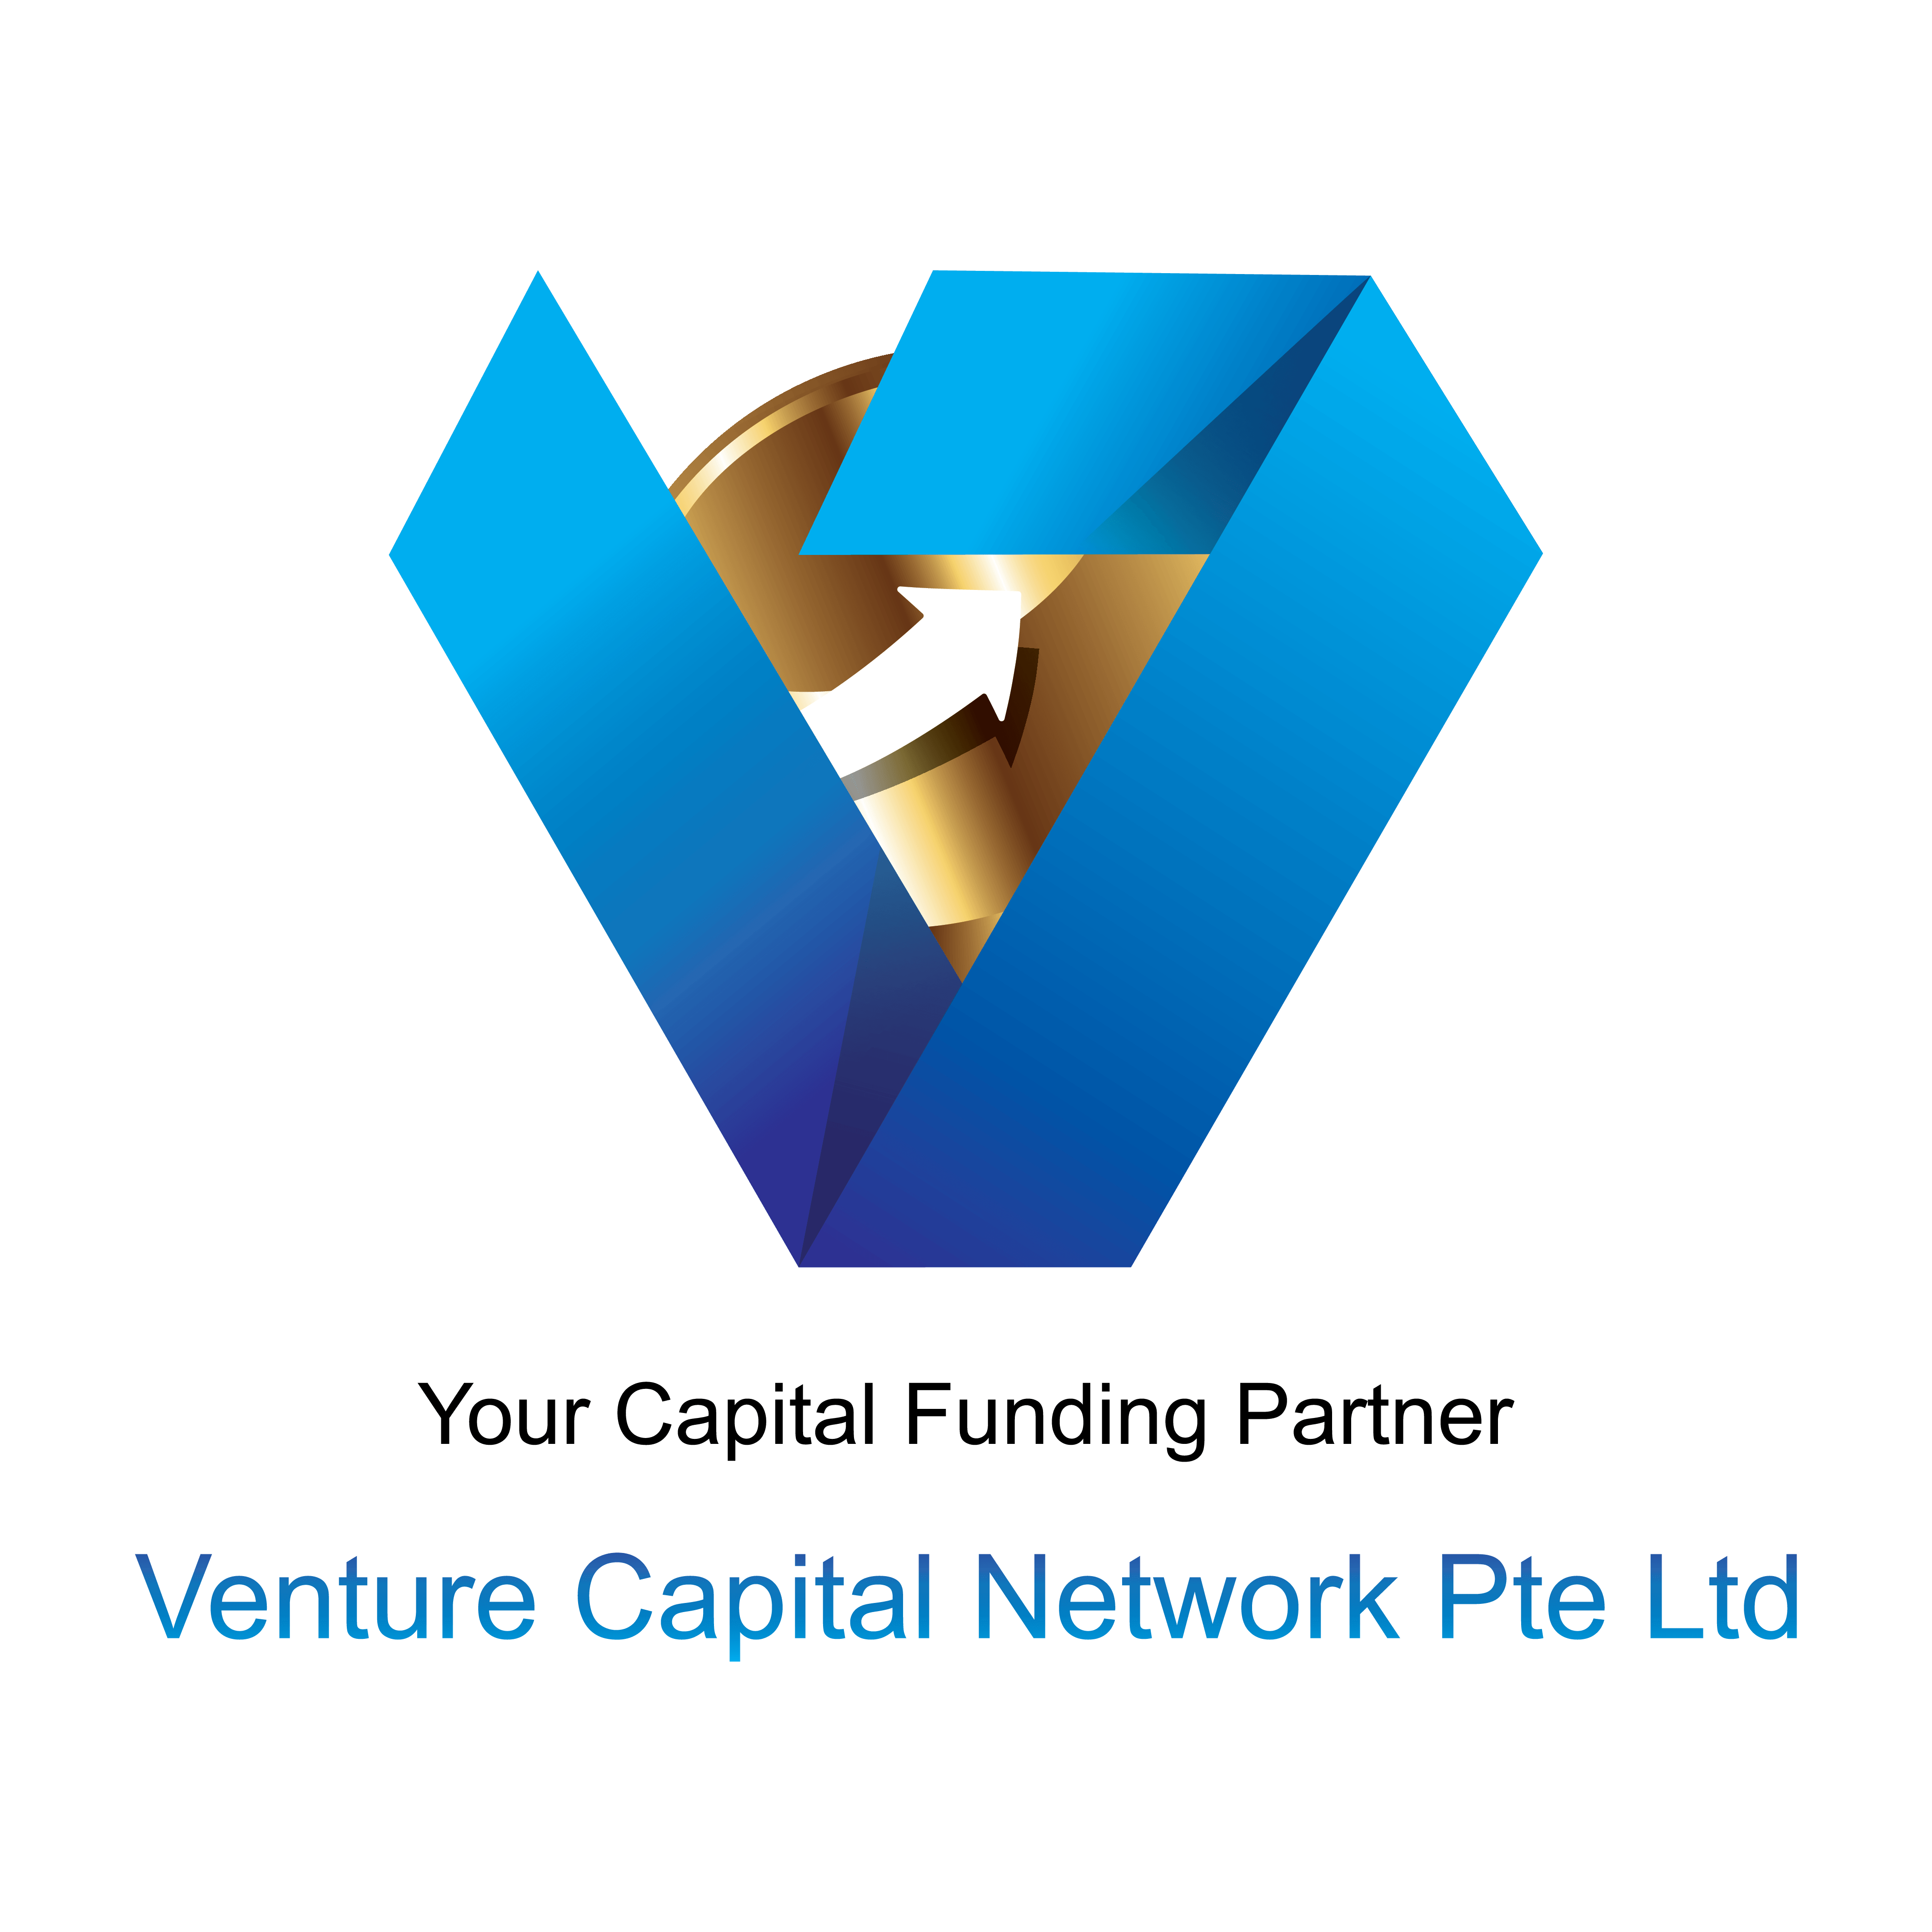 Venture-Capital Logo - Venture Capital Network | Your Capital Market and Investment Partner